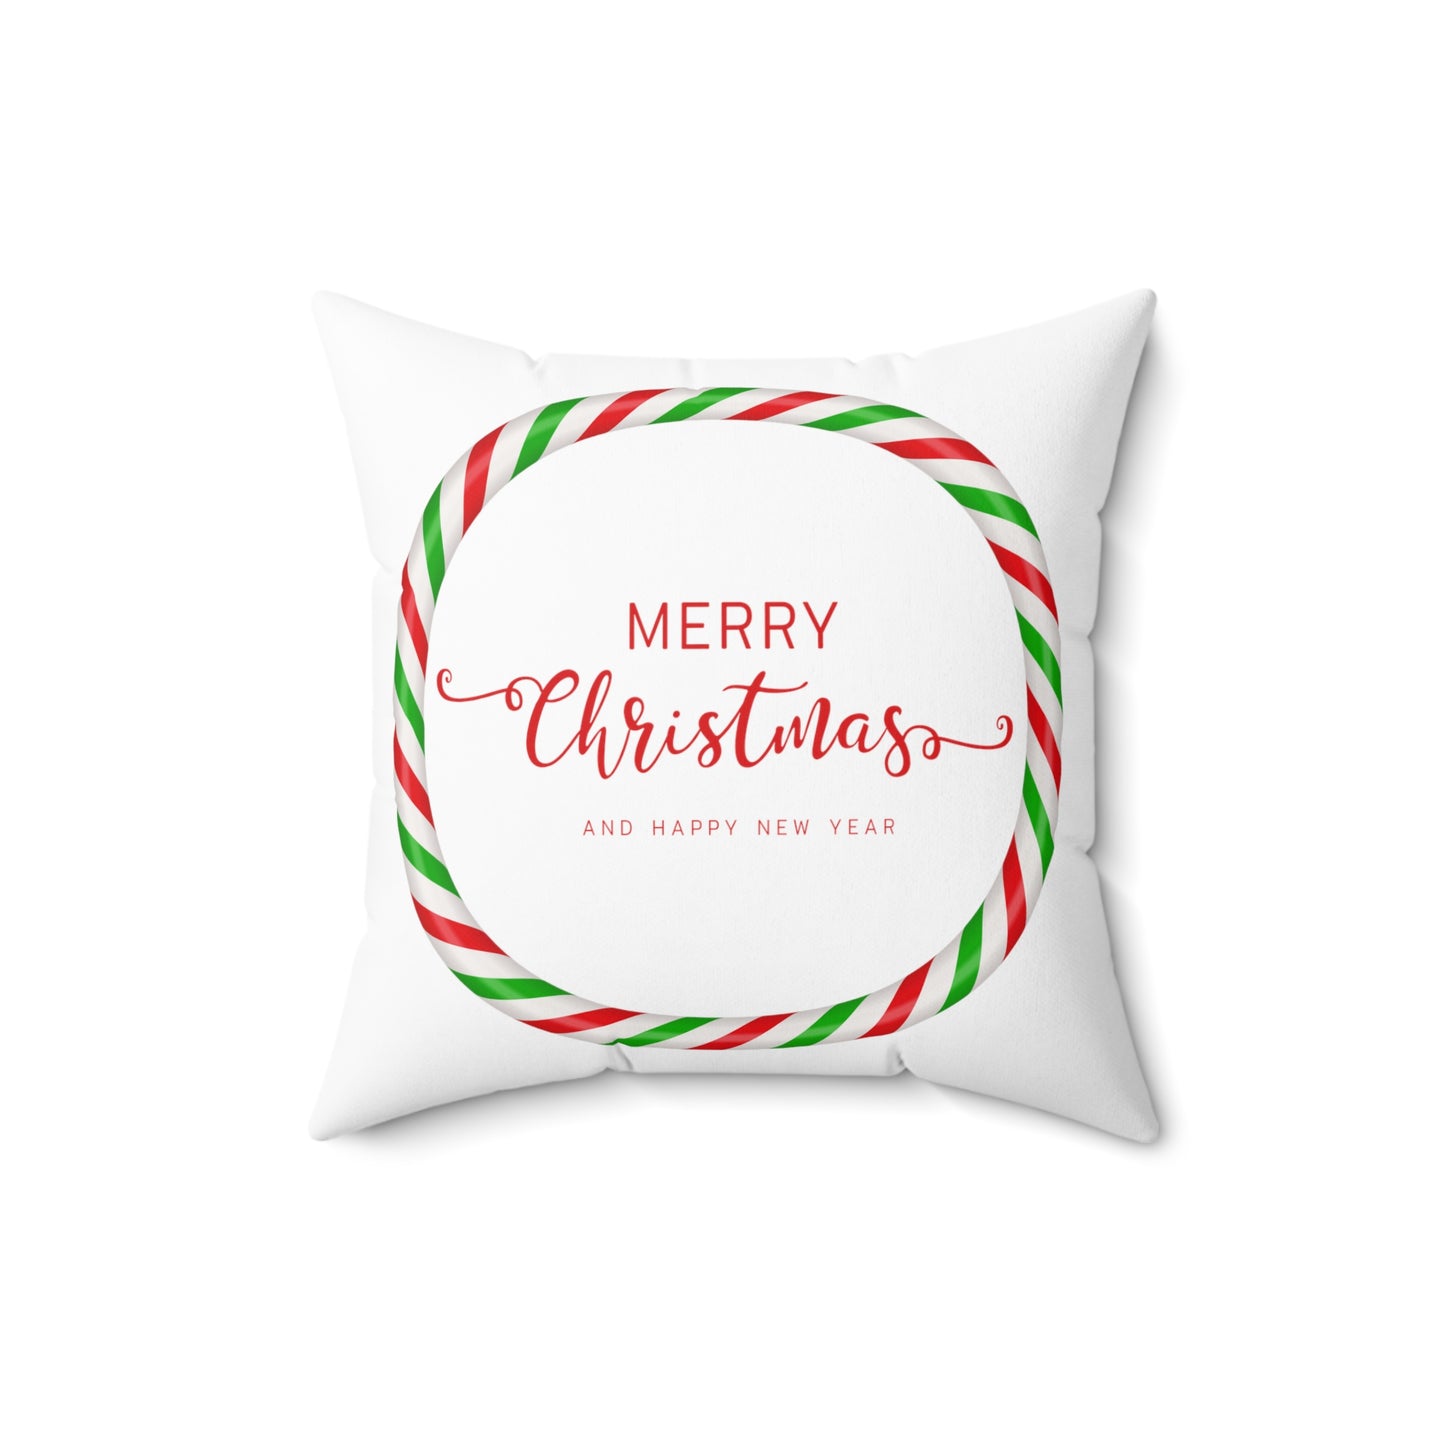 Merry Christmas and Happy New Year Printed Sqaure Pillow